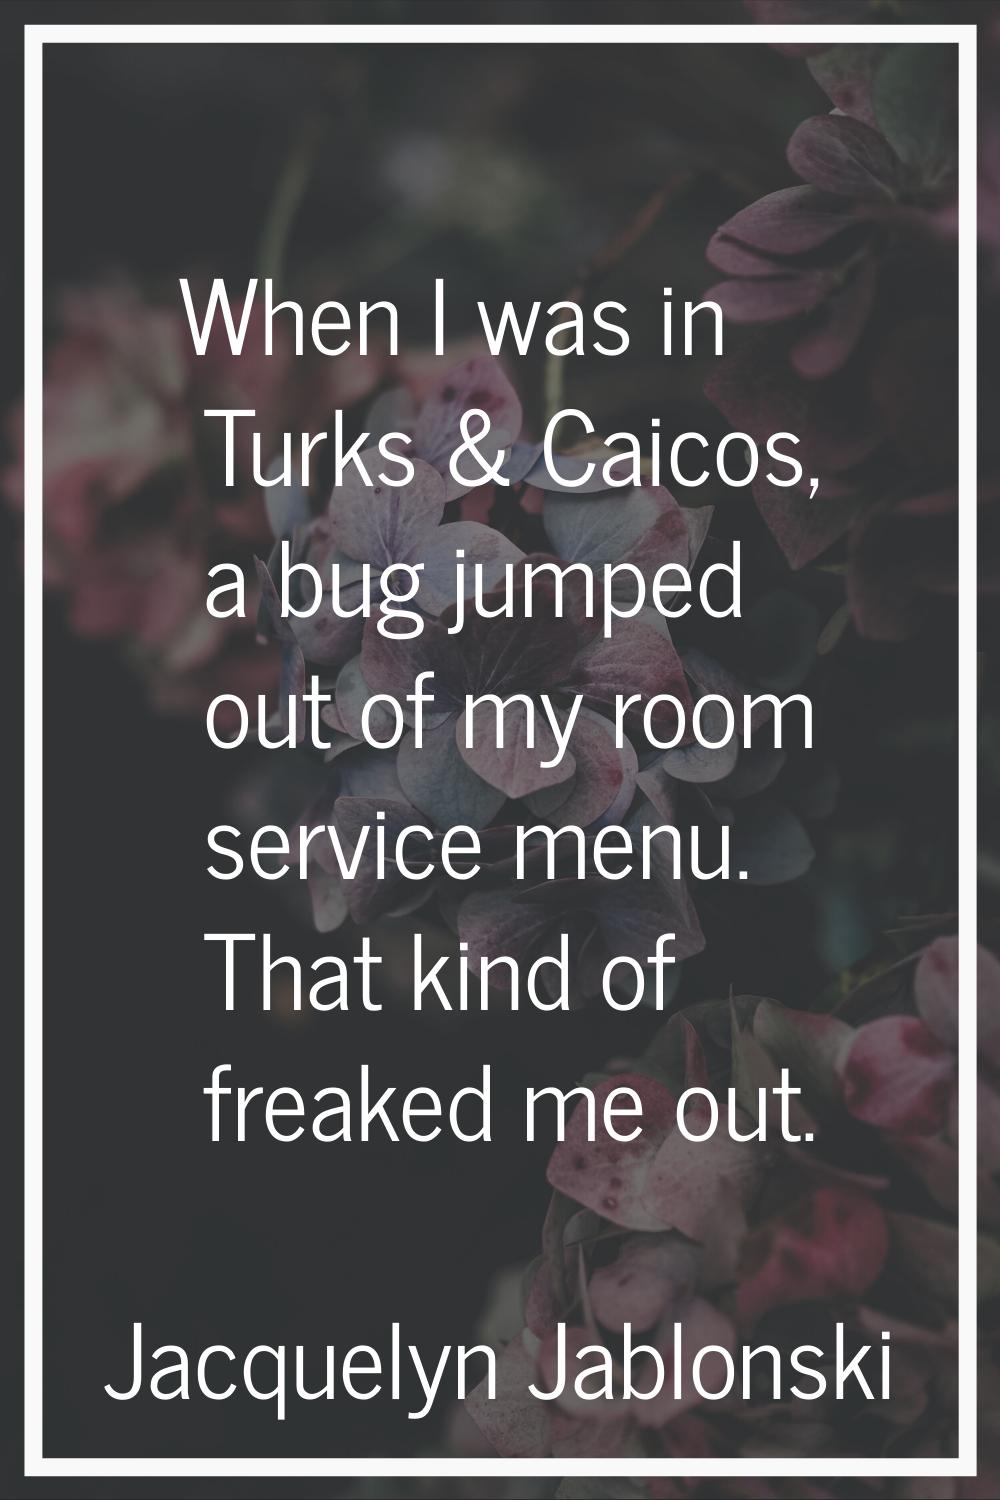 When I was in Turks & Caicos, a bug jumped out of my room service menu. That kind of freaked me out